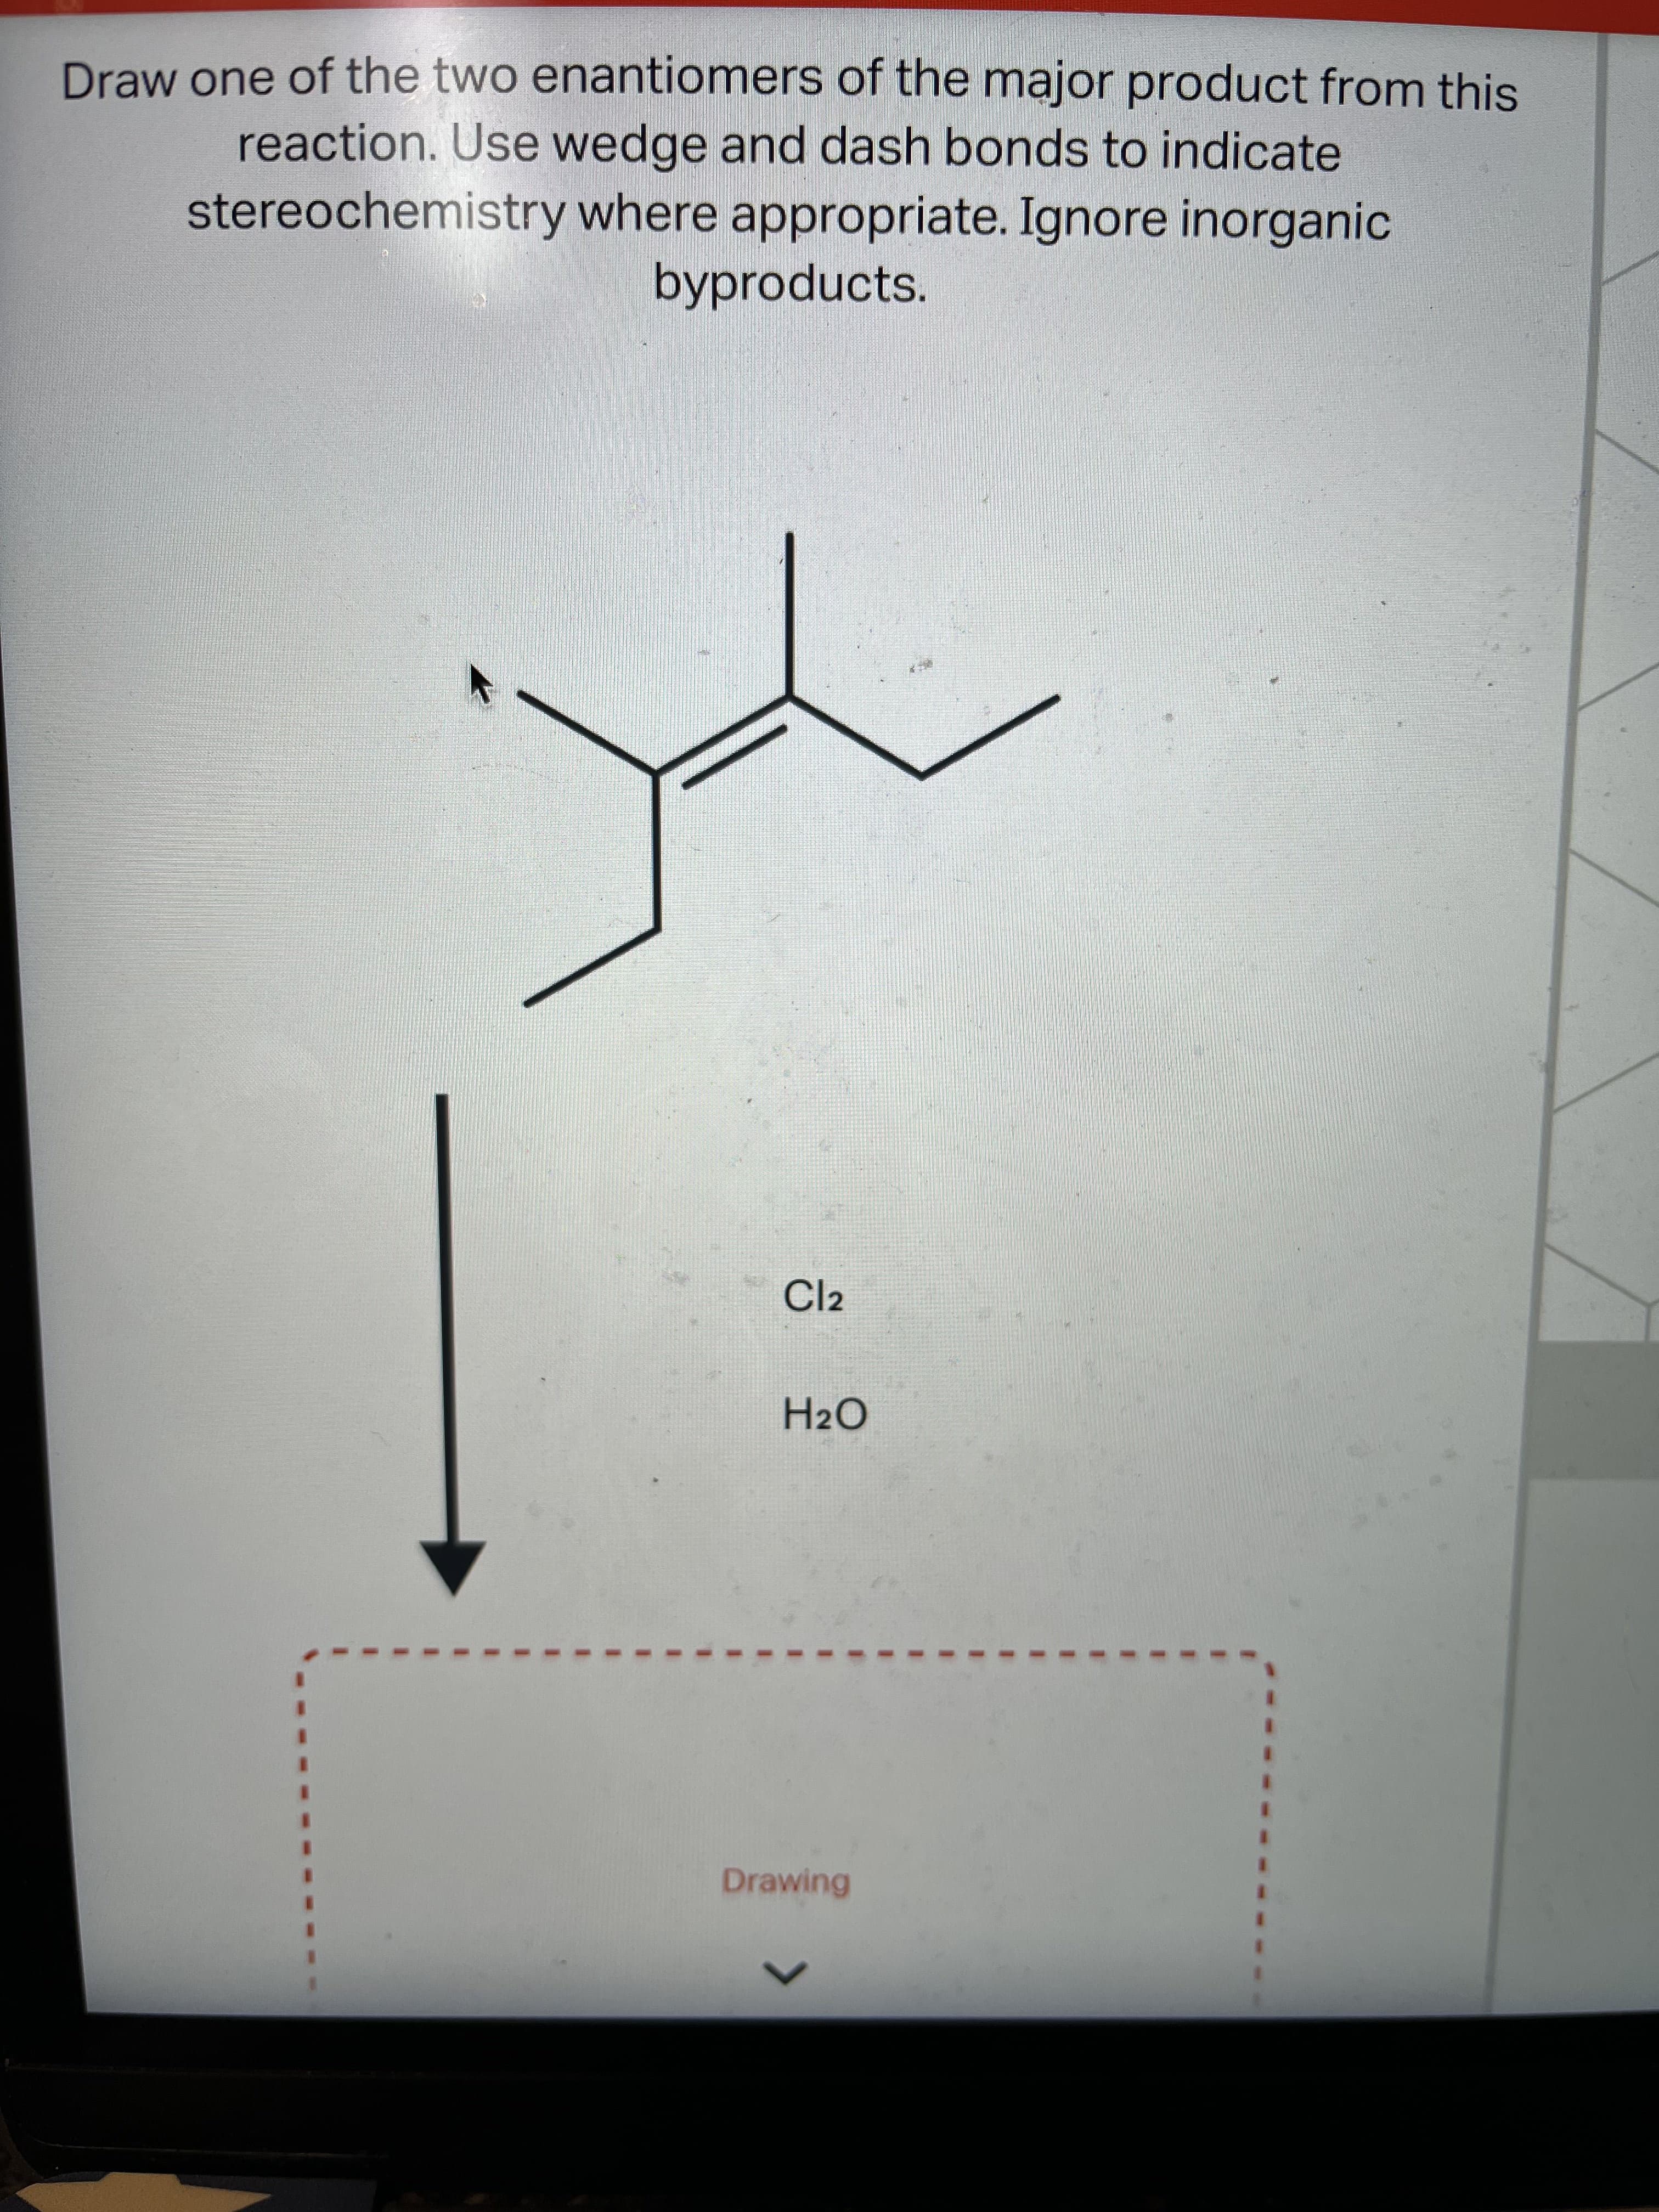 3D
%3D
3D
Draw one of the two enantiomers of the major product from this
reaction. Use wedge and dash bonds to indicate
stereochemistry where appropriate. Ignore inorganic
byproducts.
Cl2
H2O
Drawing
